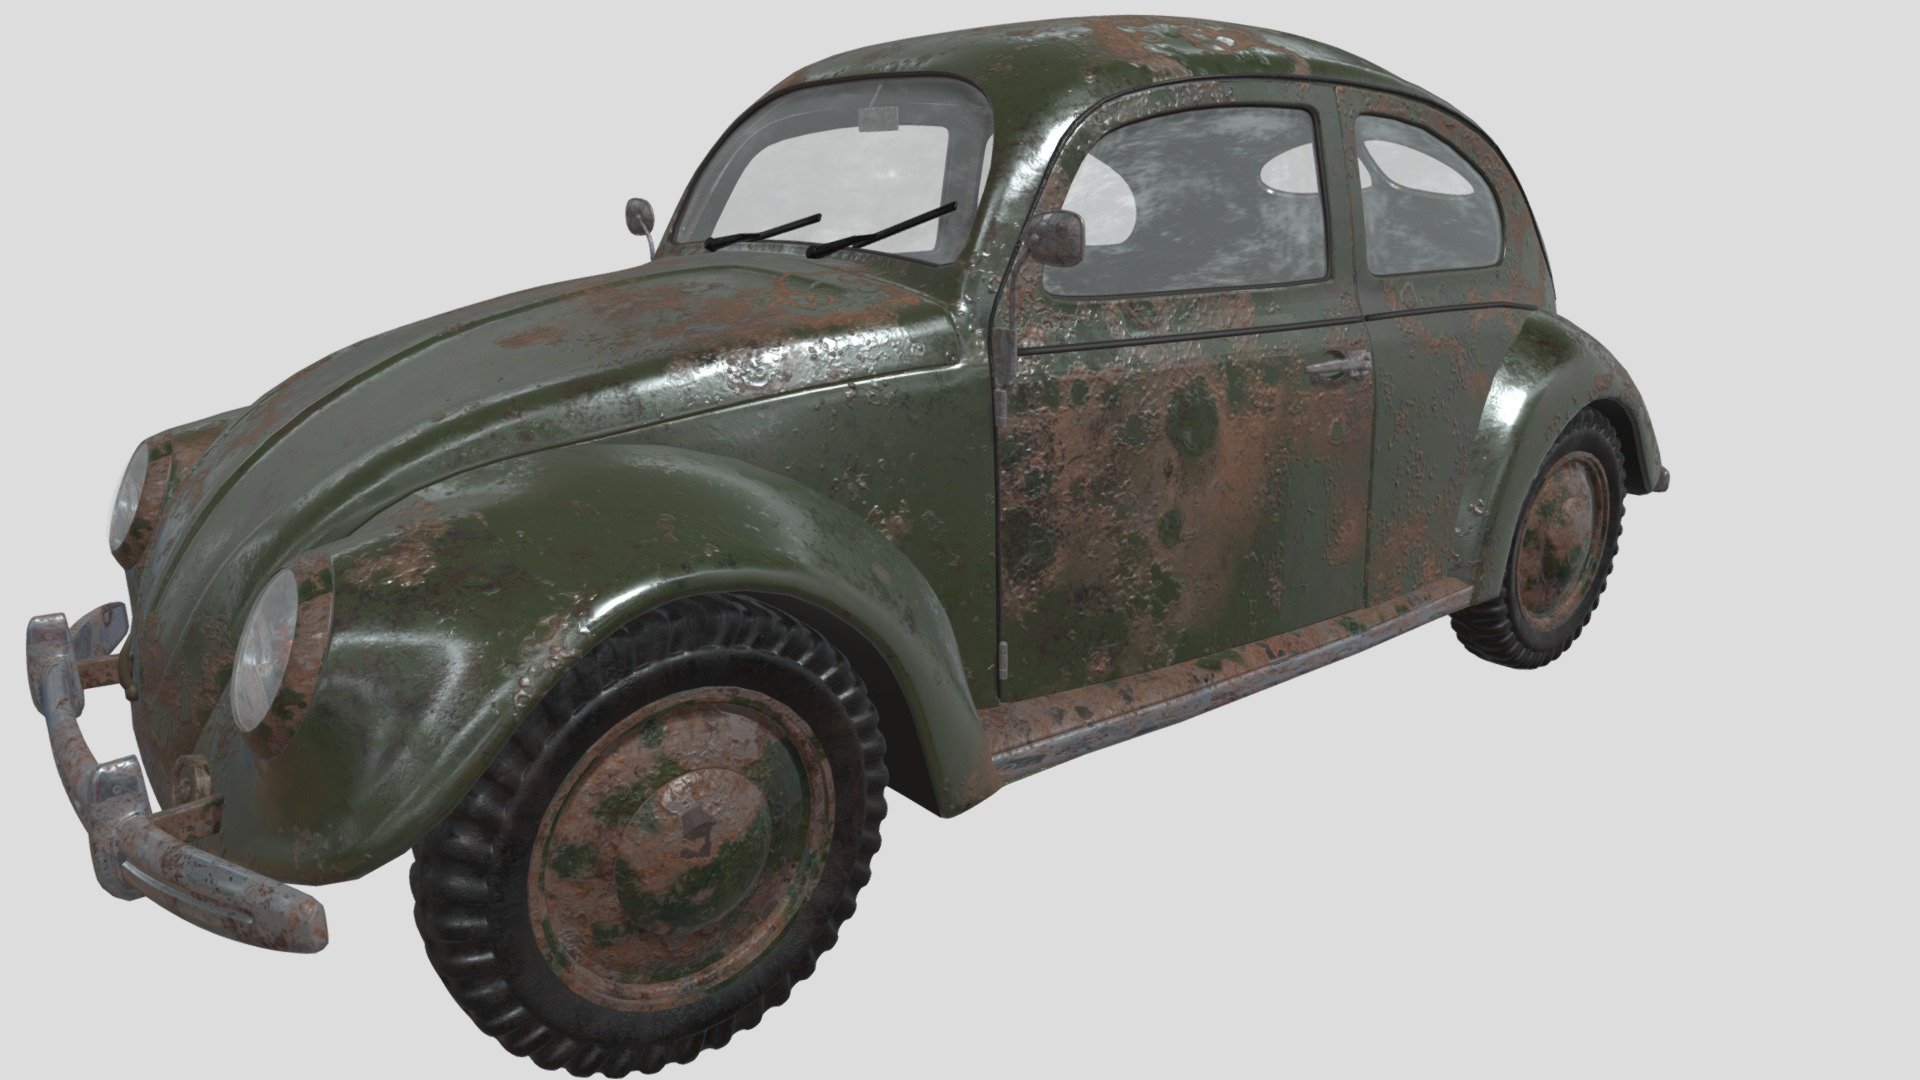 Hello

The rusty model I made inspired by the 1941 Beetle model.

High Quality Detailed Render 2K Render in Pro Render Scene

Pro Render Scene included with all Settings ( Reder Settings Materials, Ligths..) Detailed and include Cabin interior modeling

Modelling in 3DS Max 2022

Texture Painting made in Adobe Substance 3D Painter

All Textures 4K (4096x4096 Resolution) Made High Quality Saved PNG 16

Polygons:201,452 Vertex Count: 204,094

Unwraped UVs open all big parts in 3ds Max Uv map applied and Non Turbo Smooth added but All part mostly Compatibility modeled Turbo Smooth.

If you have any problems or questions, please write. -Clean Geometry Detailed Design Ready for games and Design. I wish everyone a good day. Thank you&hellip; Have a nice day 3d model